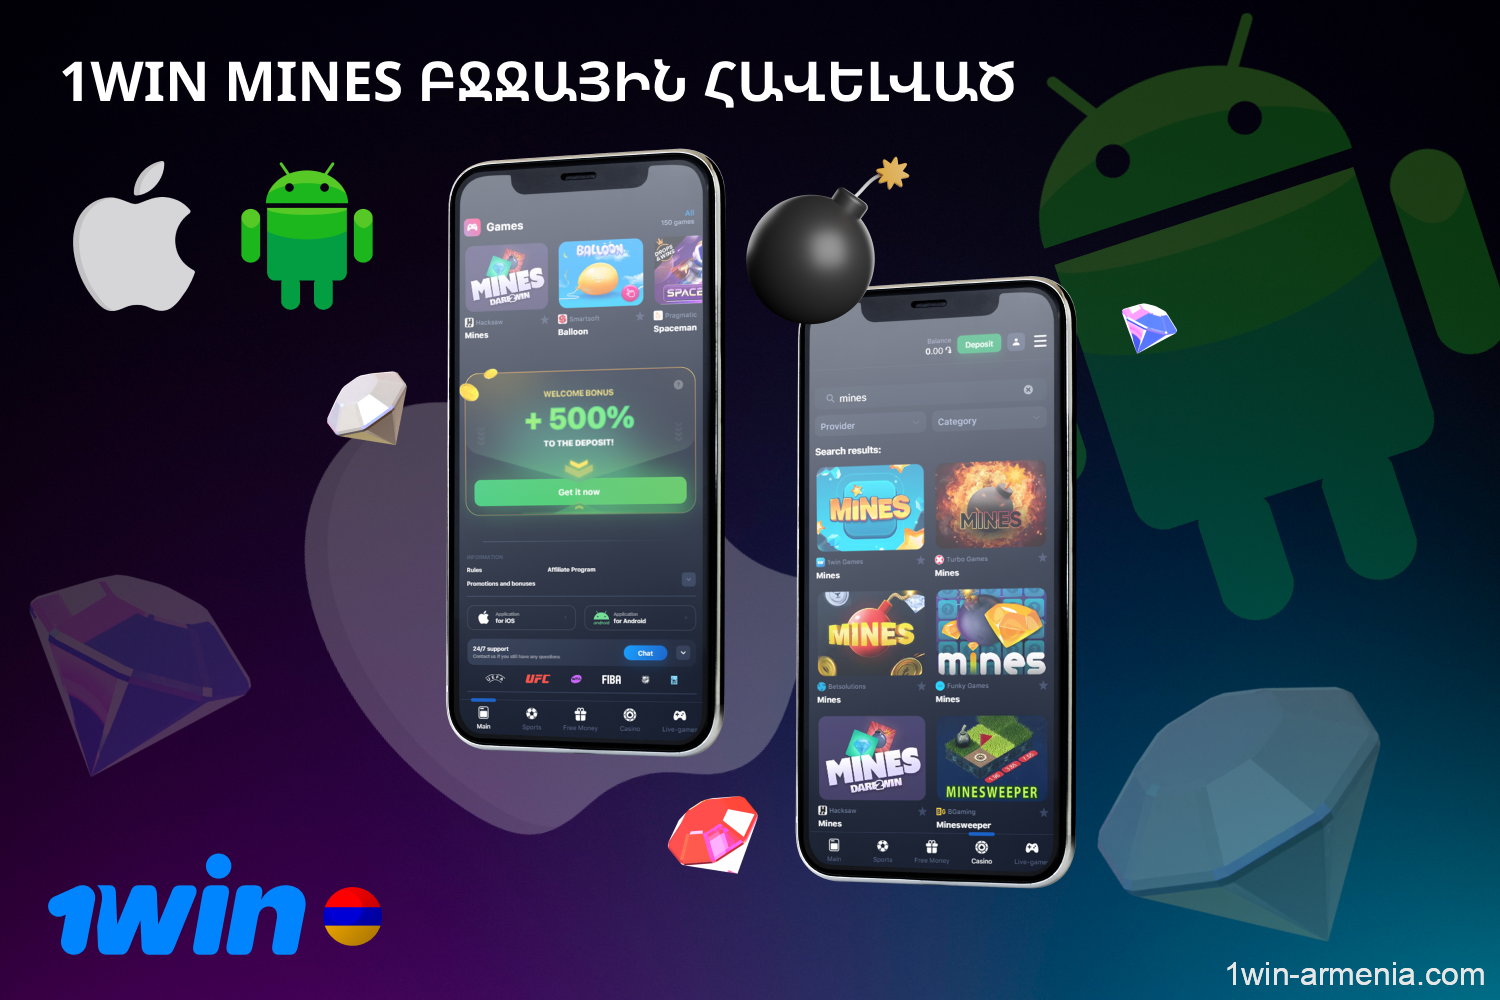 1win offers a convenient mobile app for Android and iOS that allows you to use 1win Mines on the go